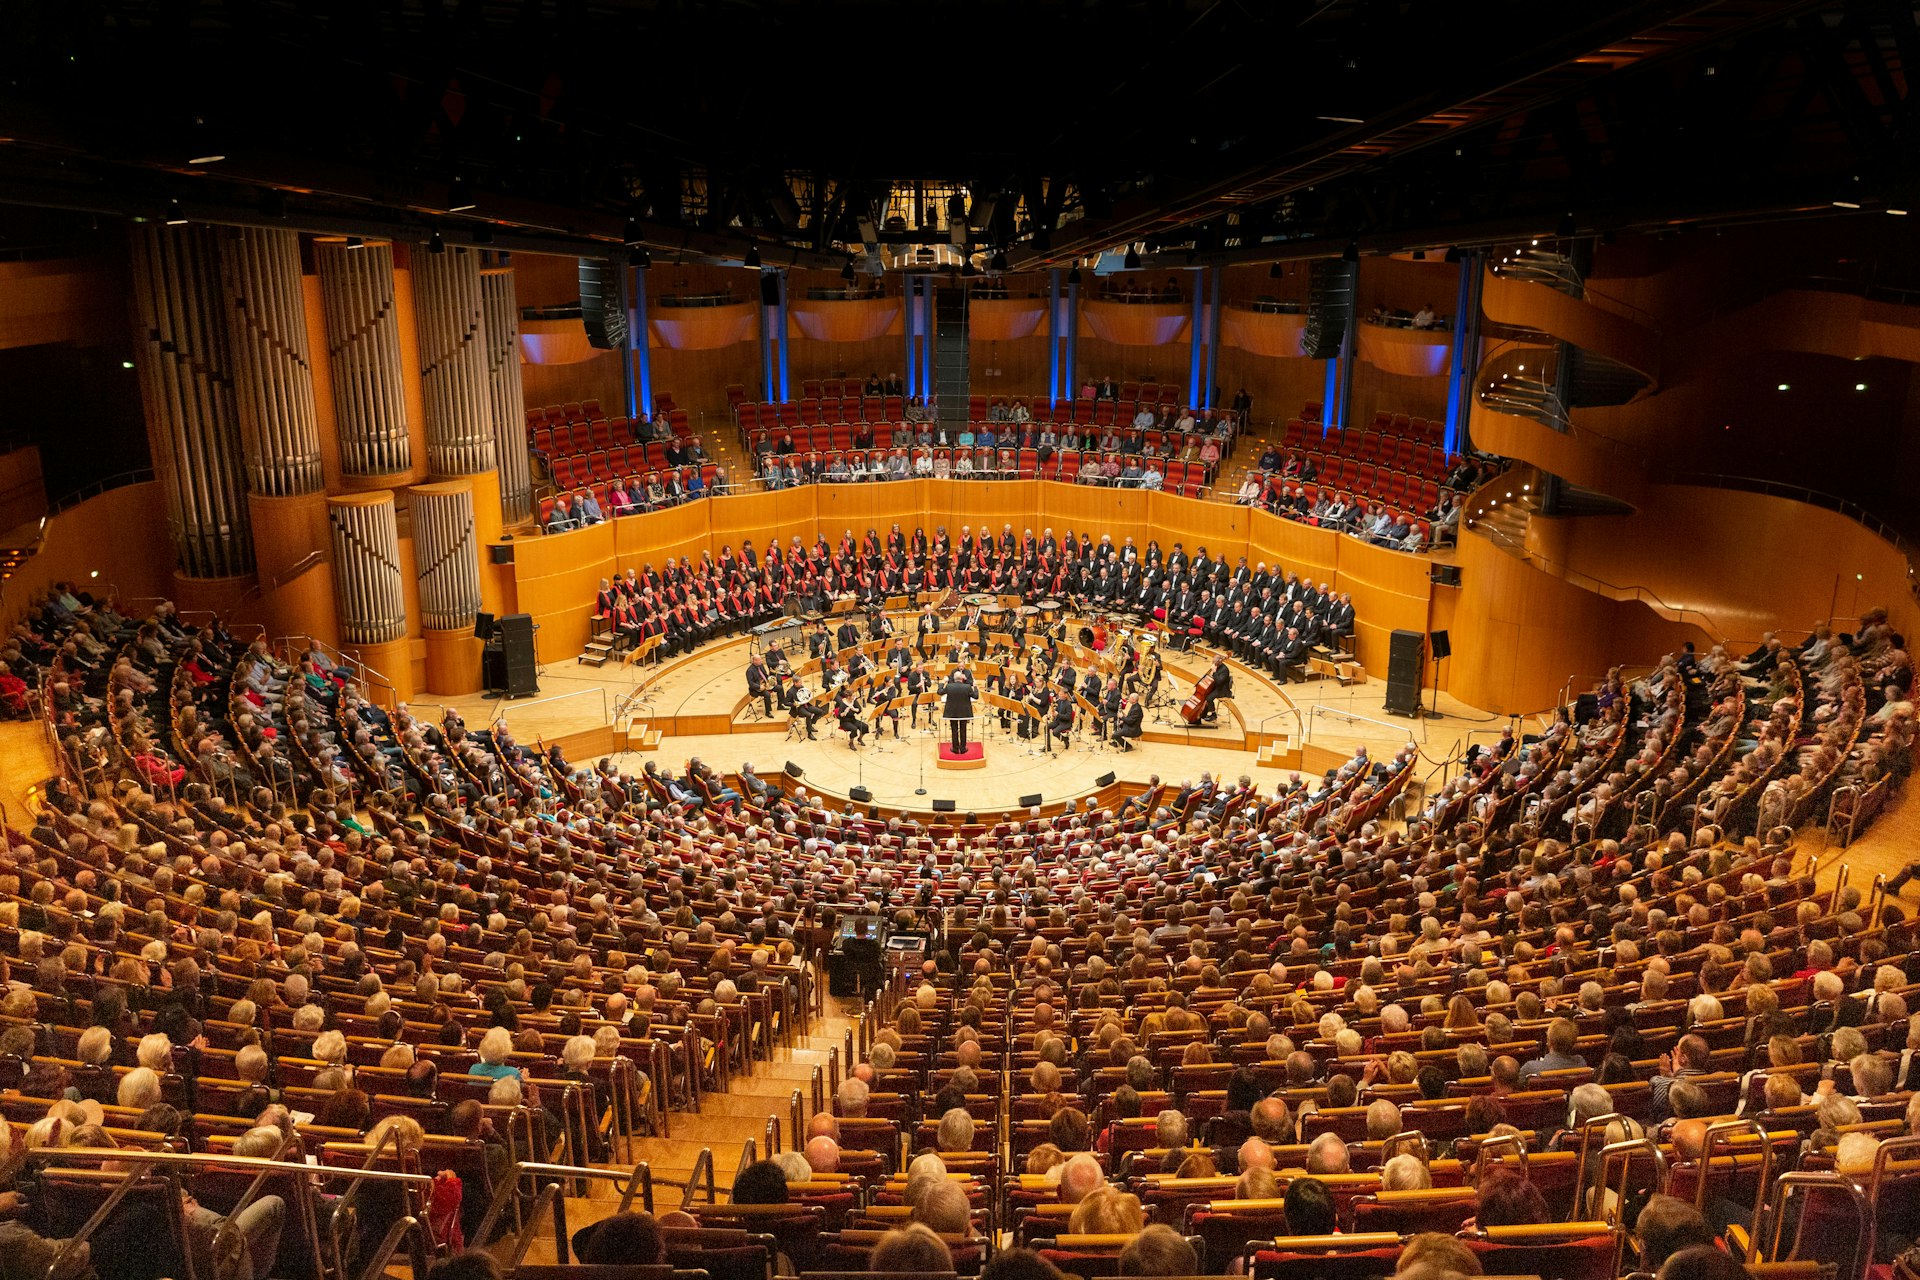 A symphonic performance at the Cologne Philharmonic